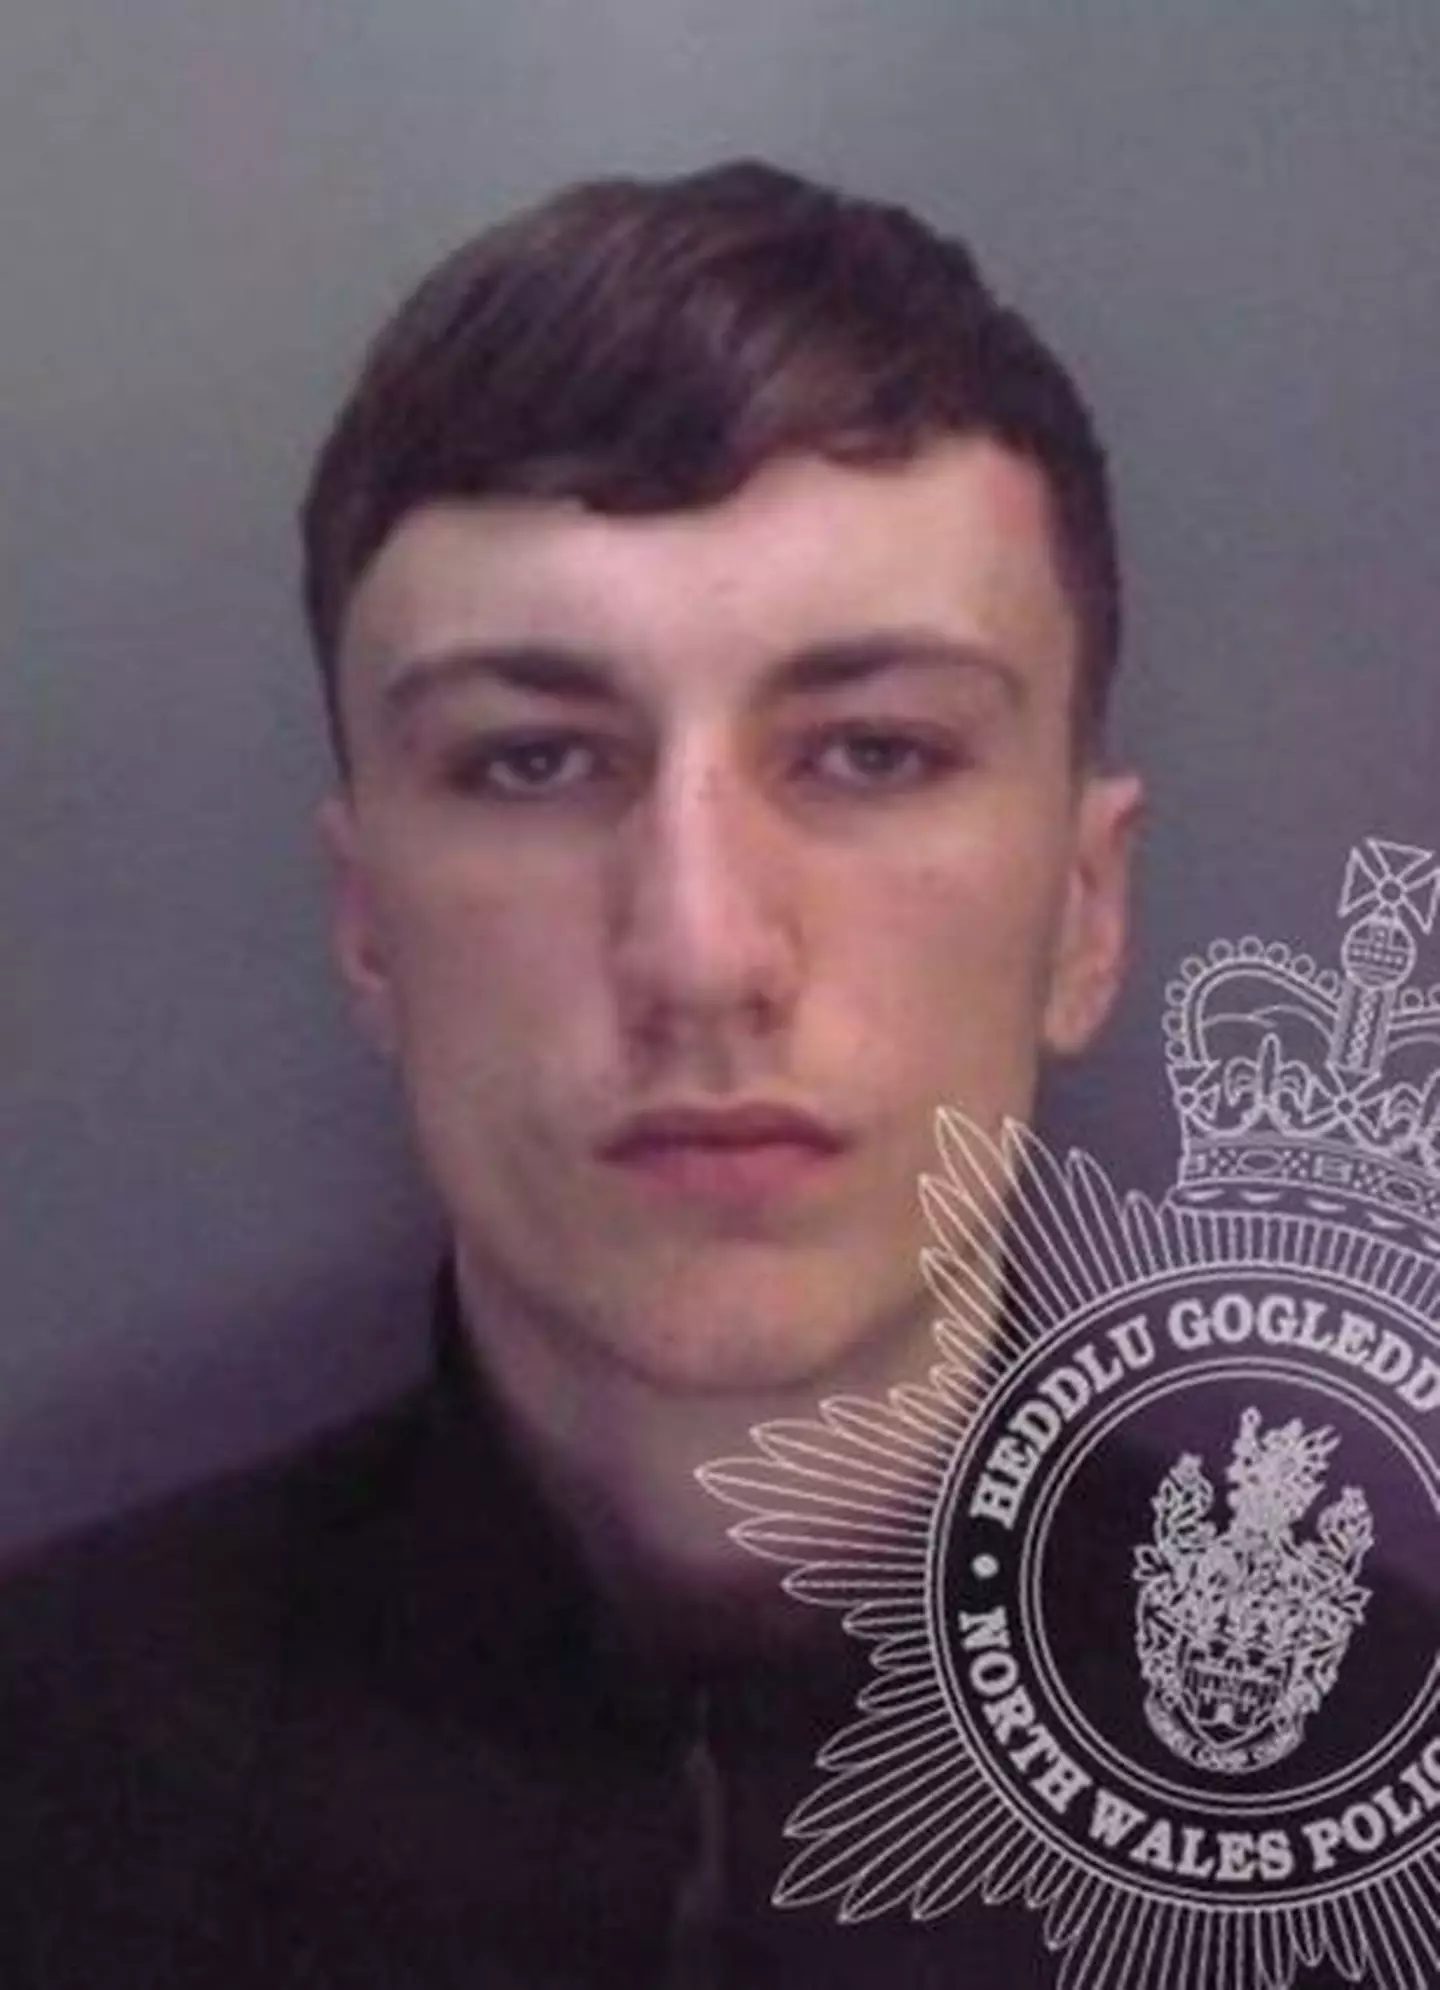 Callum Lee Davies was jailed for the attack.